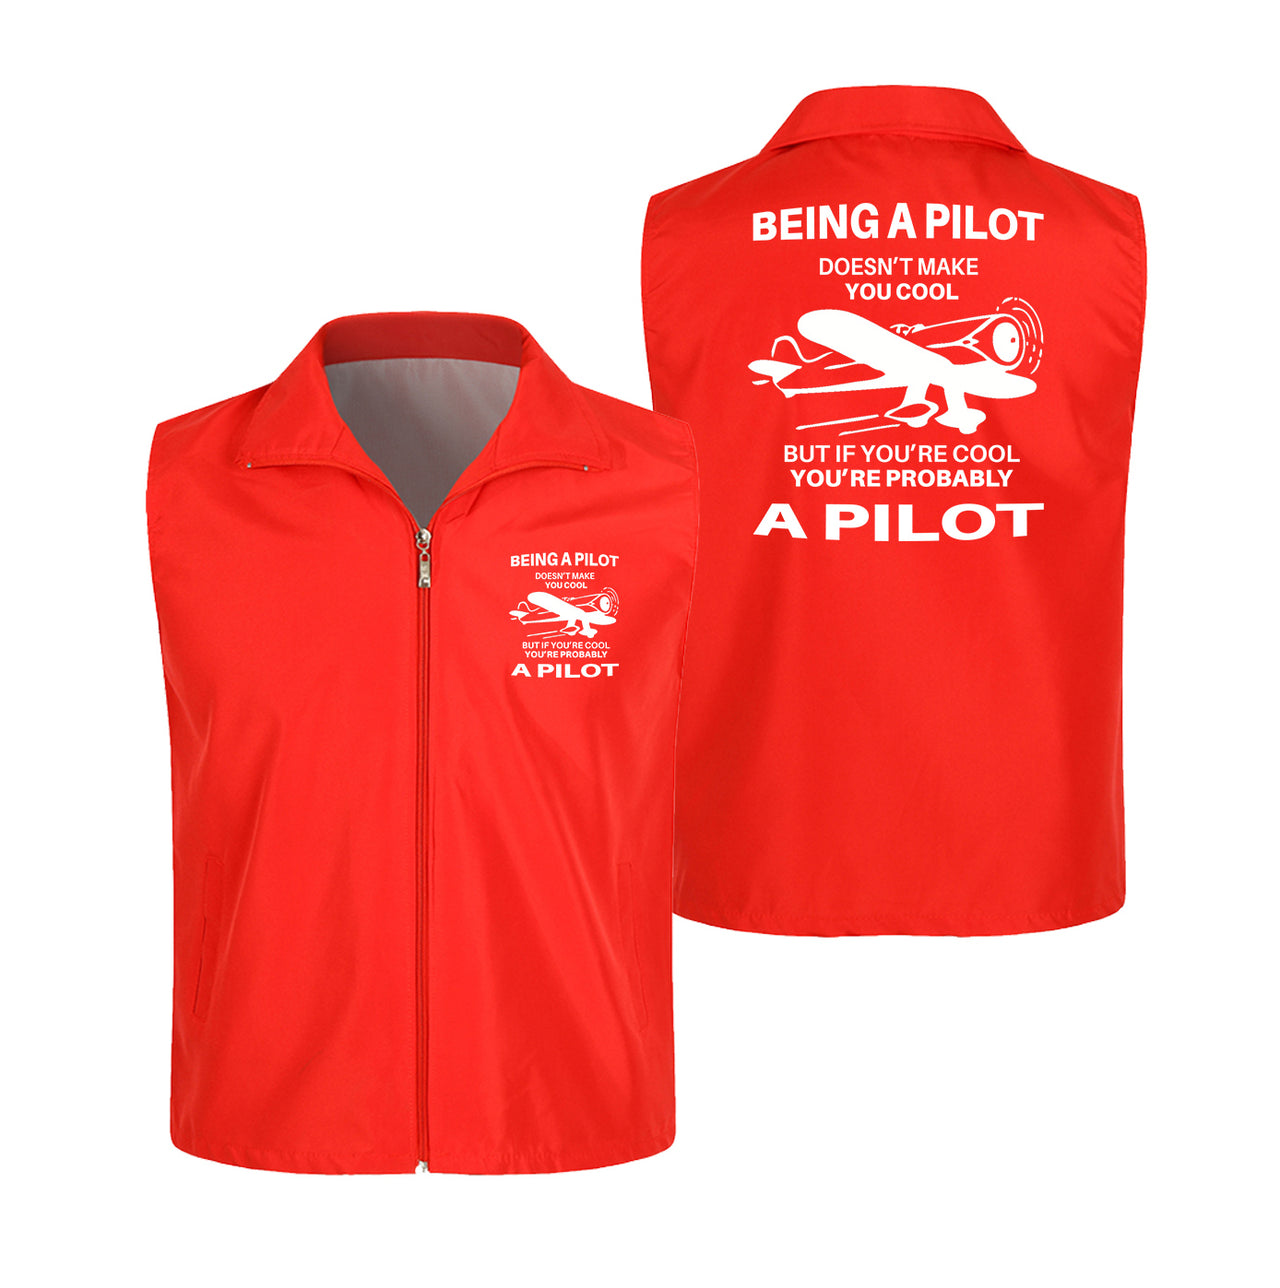 If You're Cool You're Probably a Pilot Designed Thin Style Vests